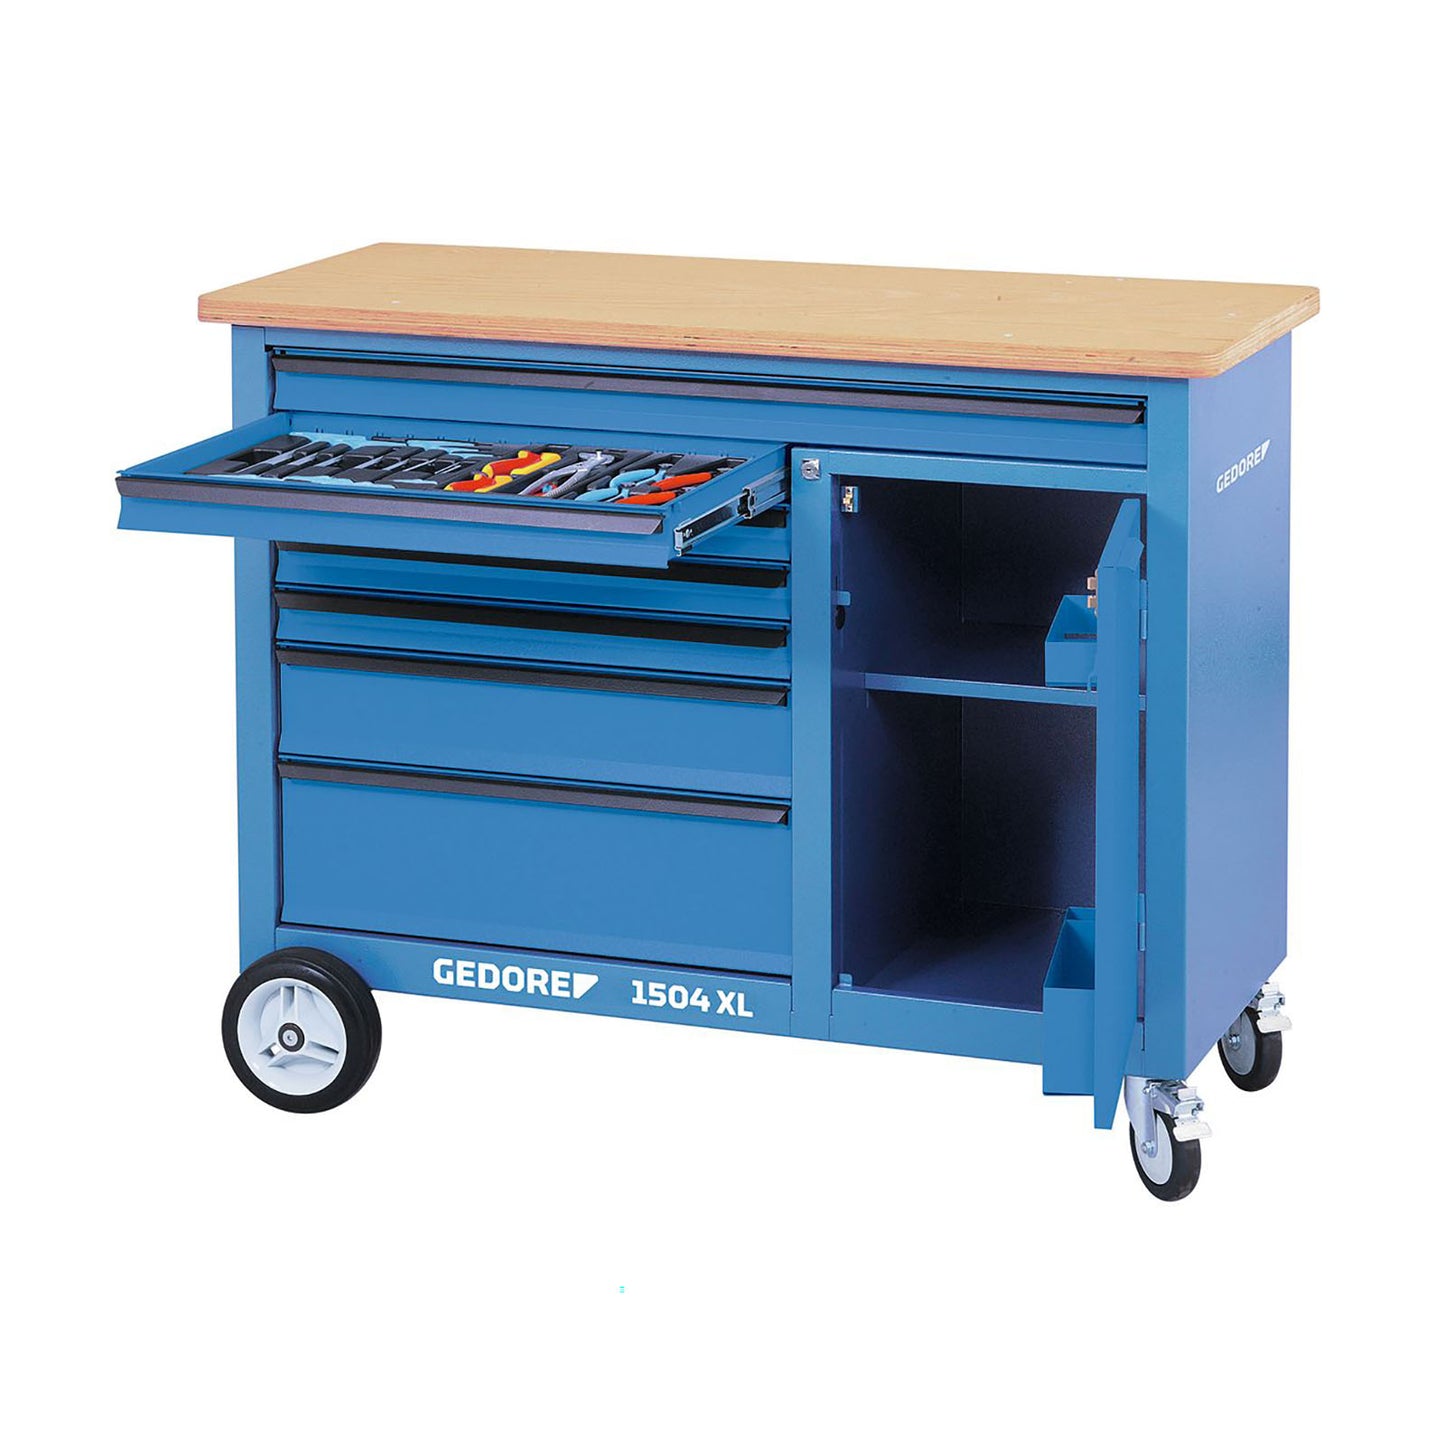 GEDORE 1504 XL - Wide mobile workbench (1988468)